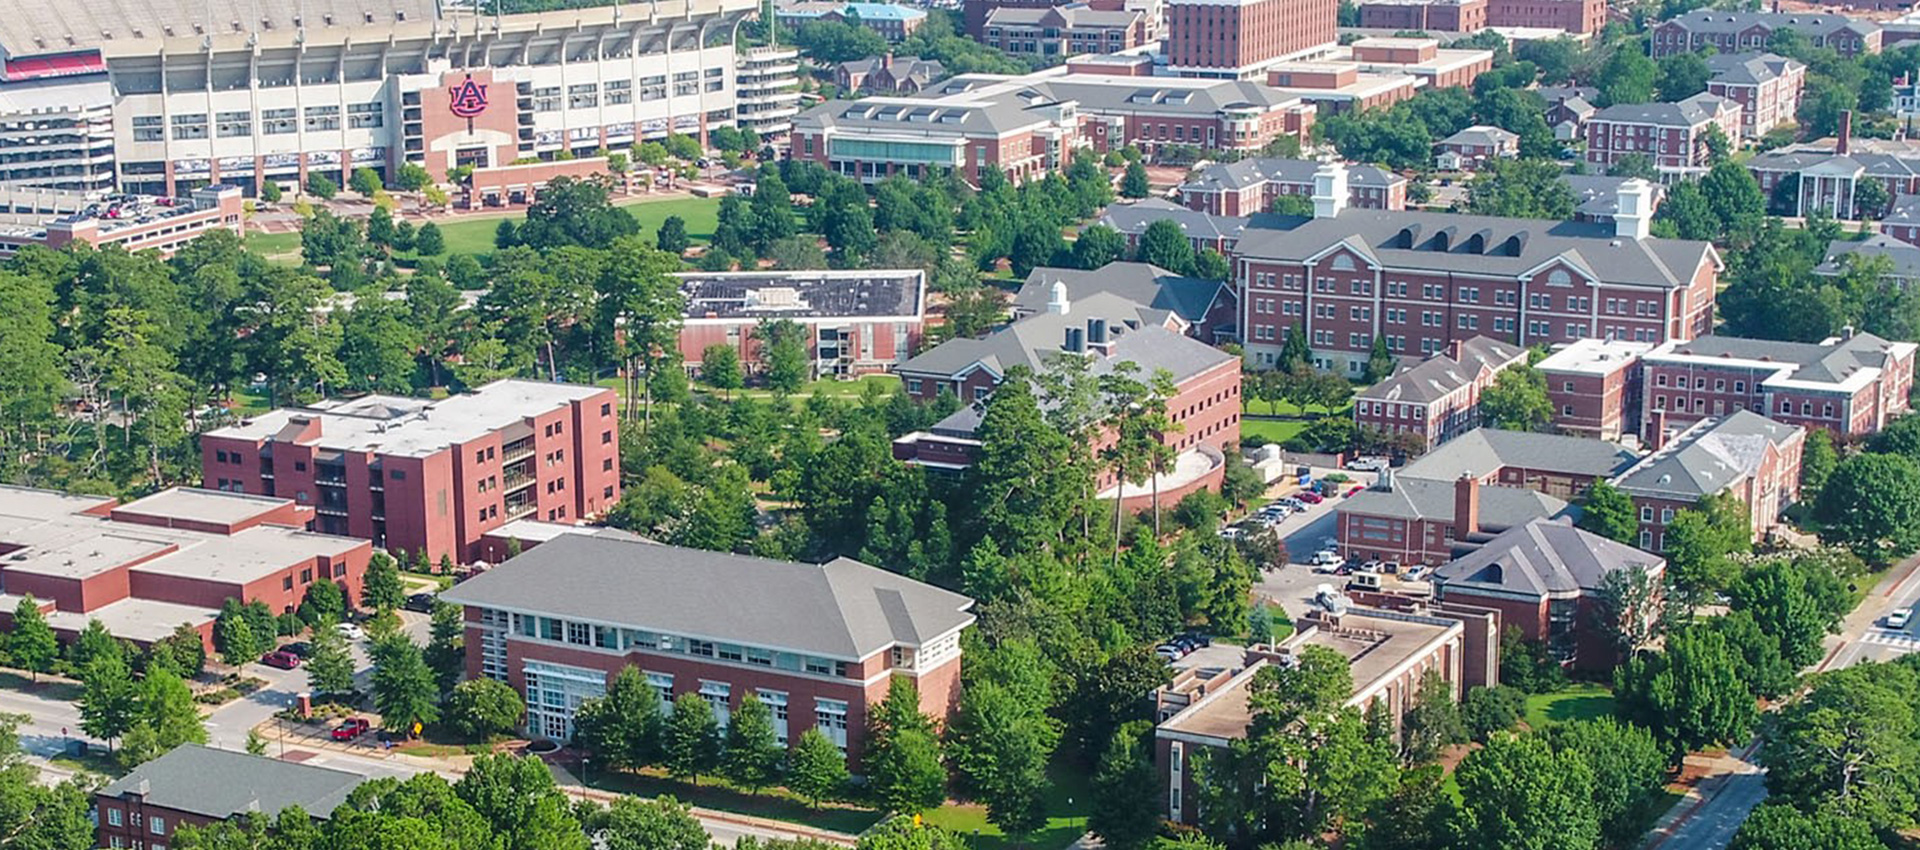 arial view of COSAM buidlings on campus